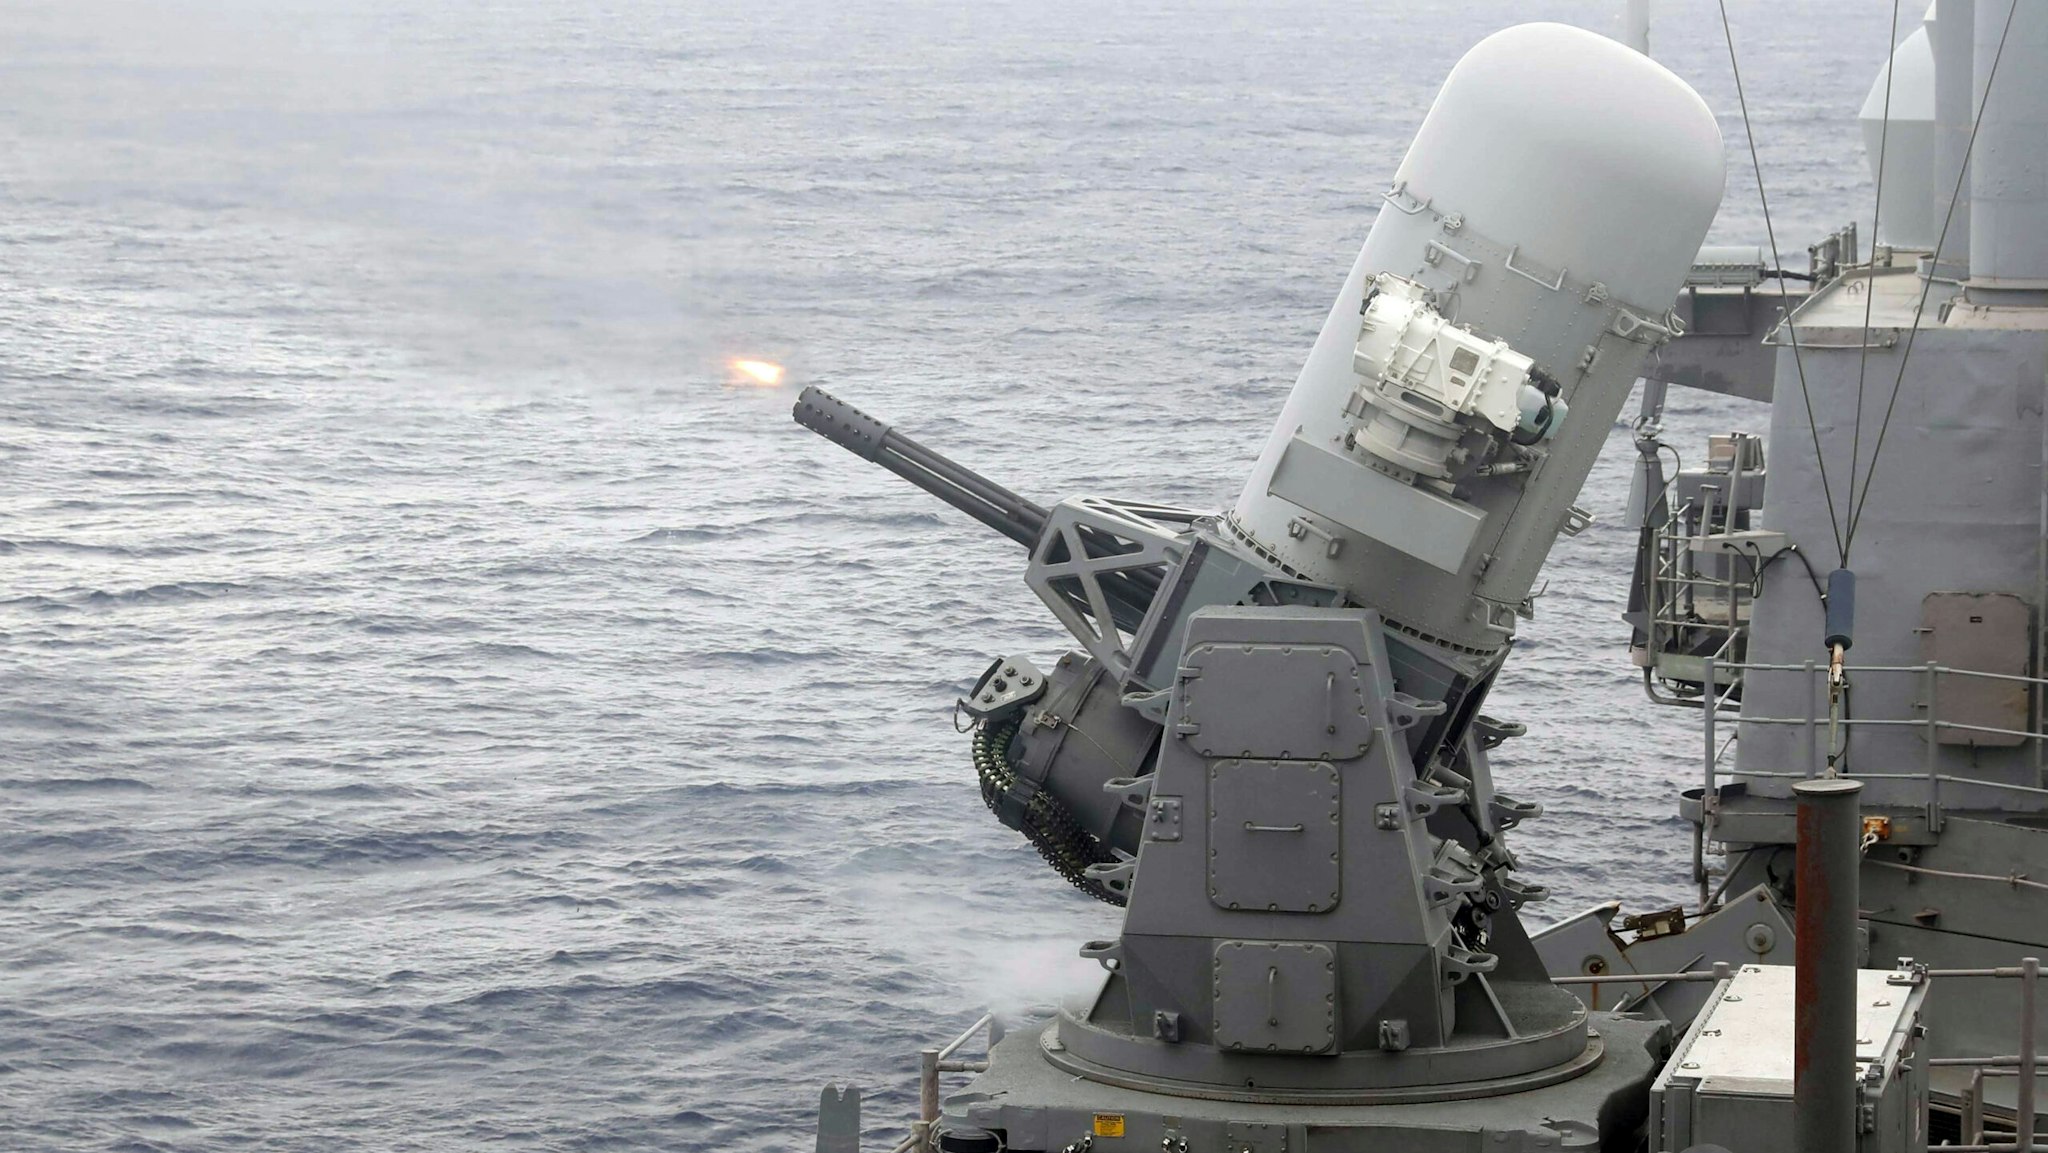 230115-N-BN445-1090 PHILIPPINE SEA (Jan. 15, 2023) The Ticonderoga-class guided-missile cruiser USS Chancellorsville (CG 62) fires its Phalanx close-in weapons system (CIWS) as a part of a live fire exercise while underway, Jan. 15 in the Philippine Sea. Chancellorsville is assigned to Commander, Task Force 70/Carrier Strike Group 5 underway preforming routine operations in support of a free and open Indo-Pacific.